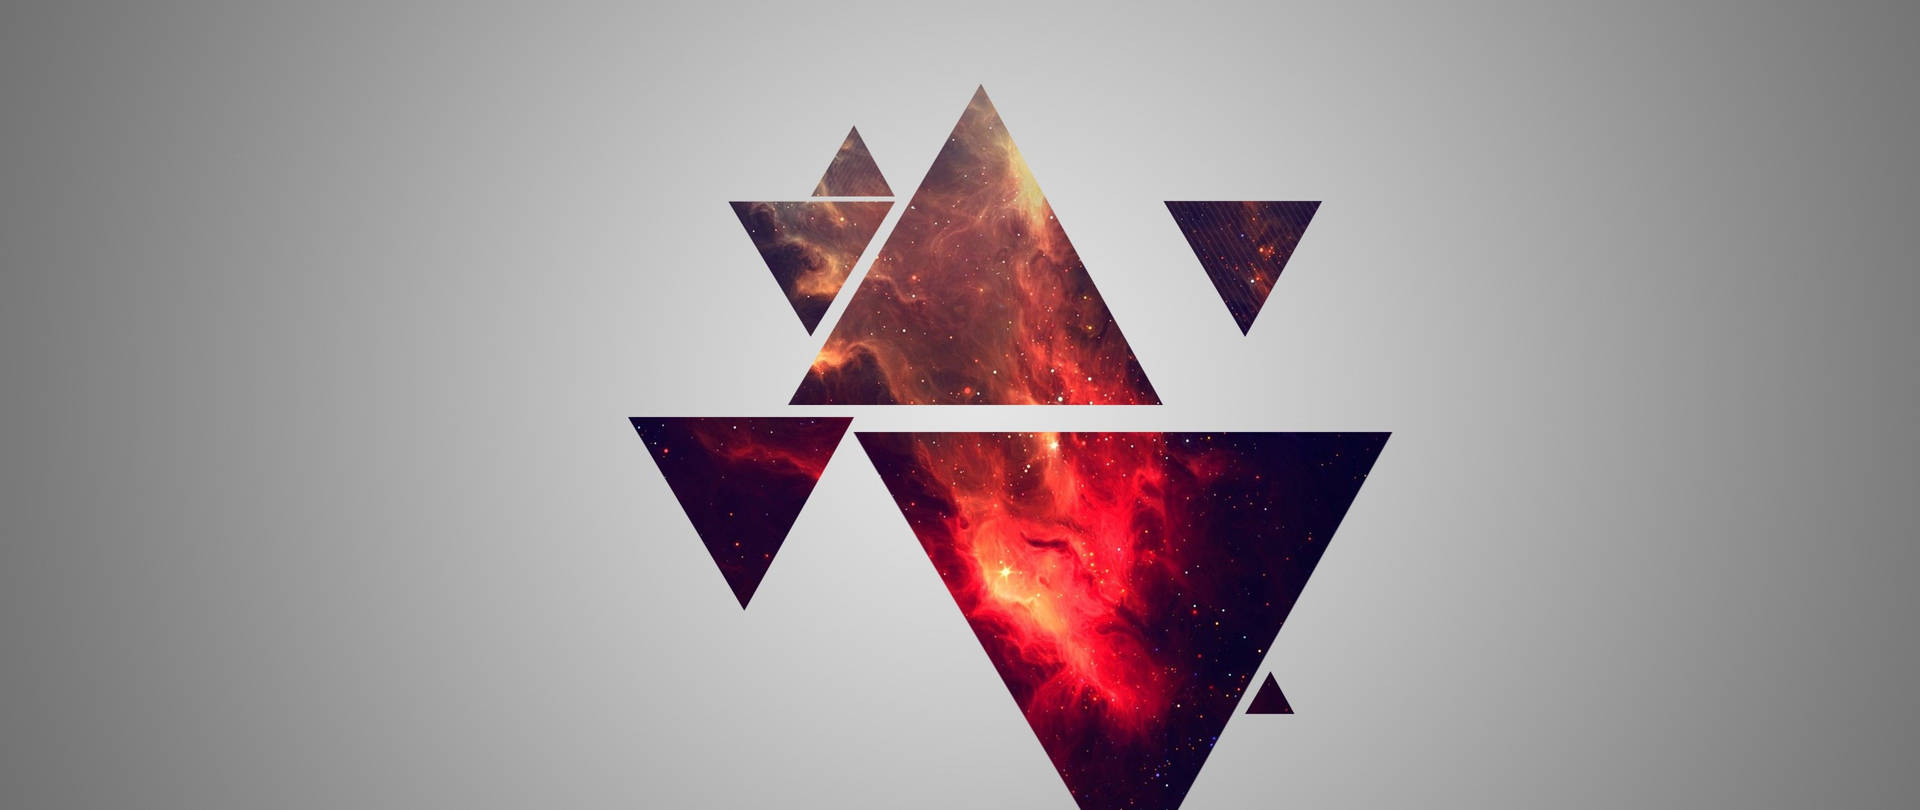 Galactic Triangles Abstract Design